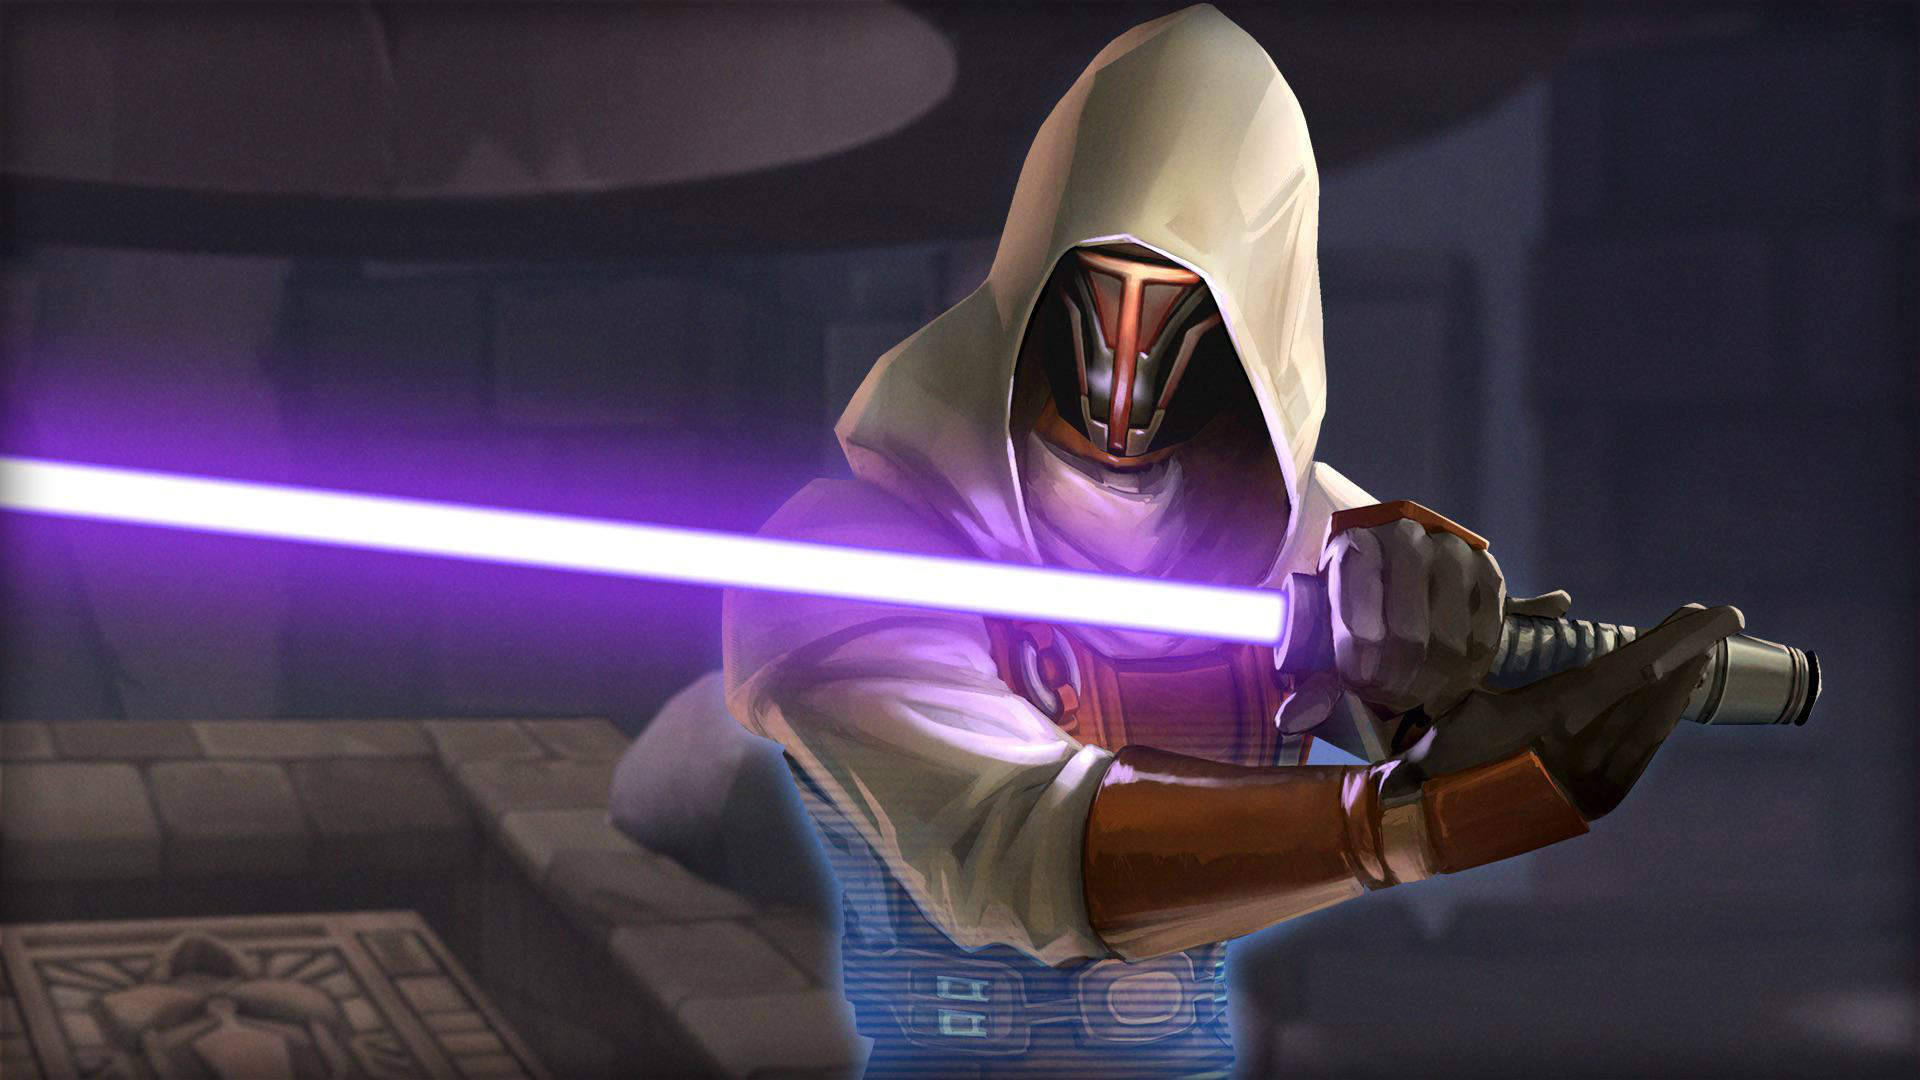 Darth Revan, the powerful Sith Lord Wallpaper